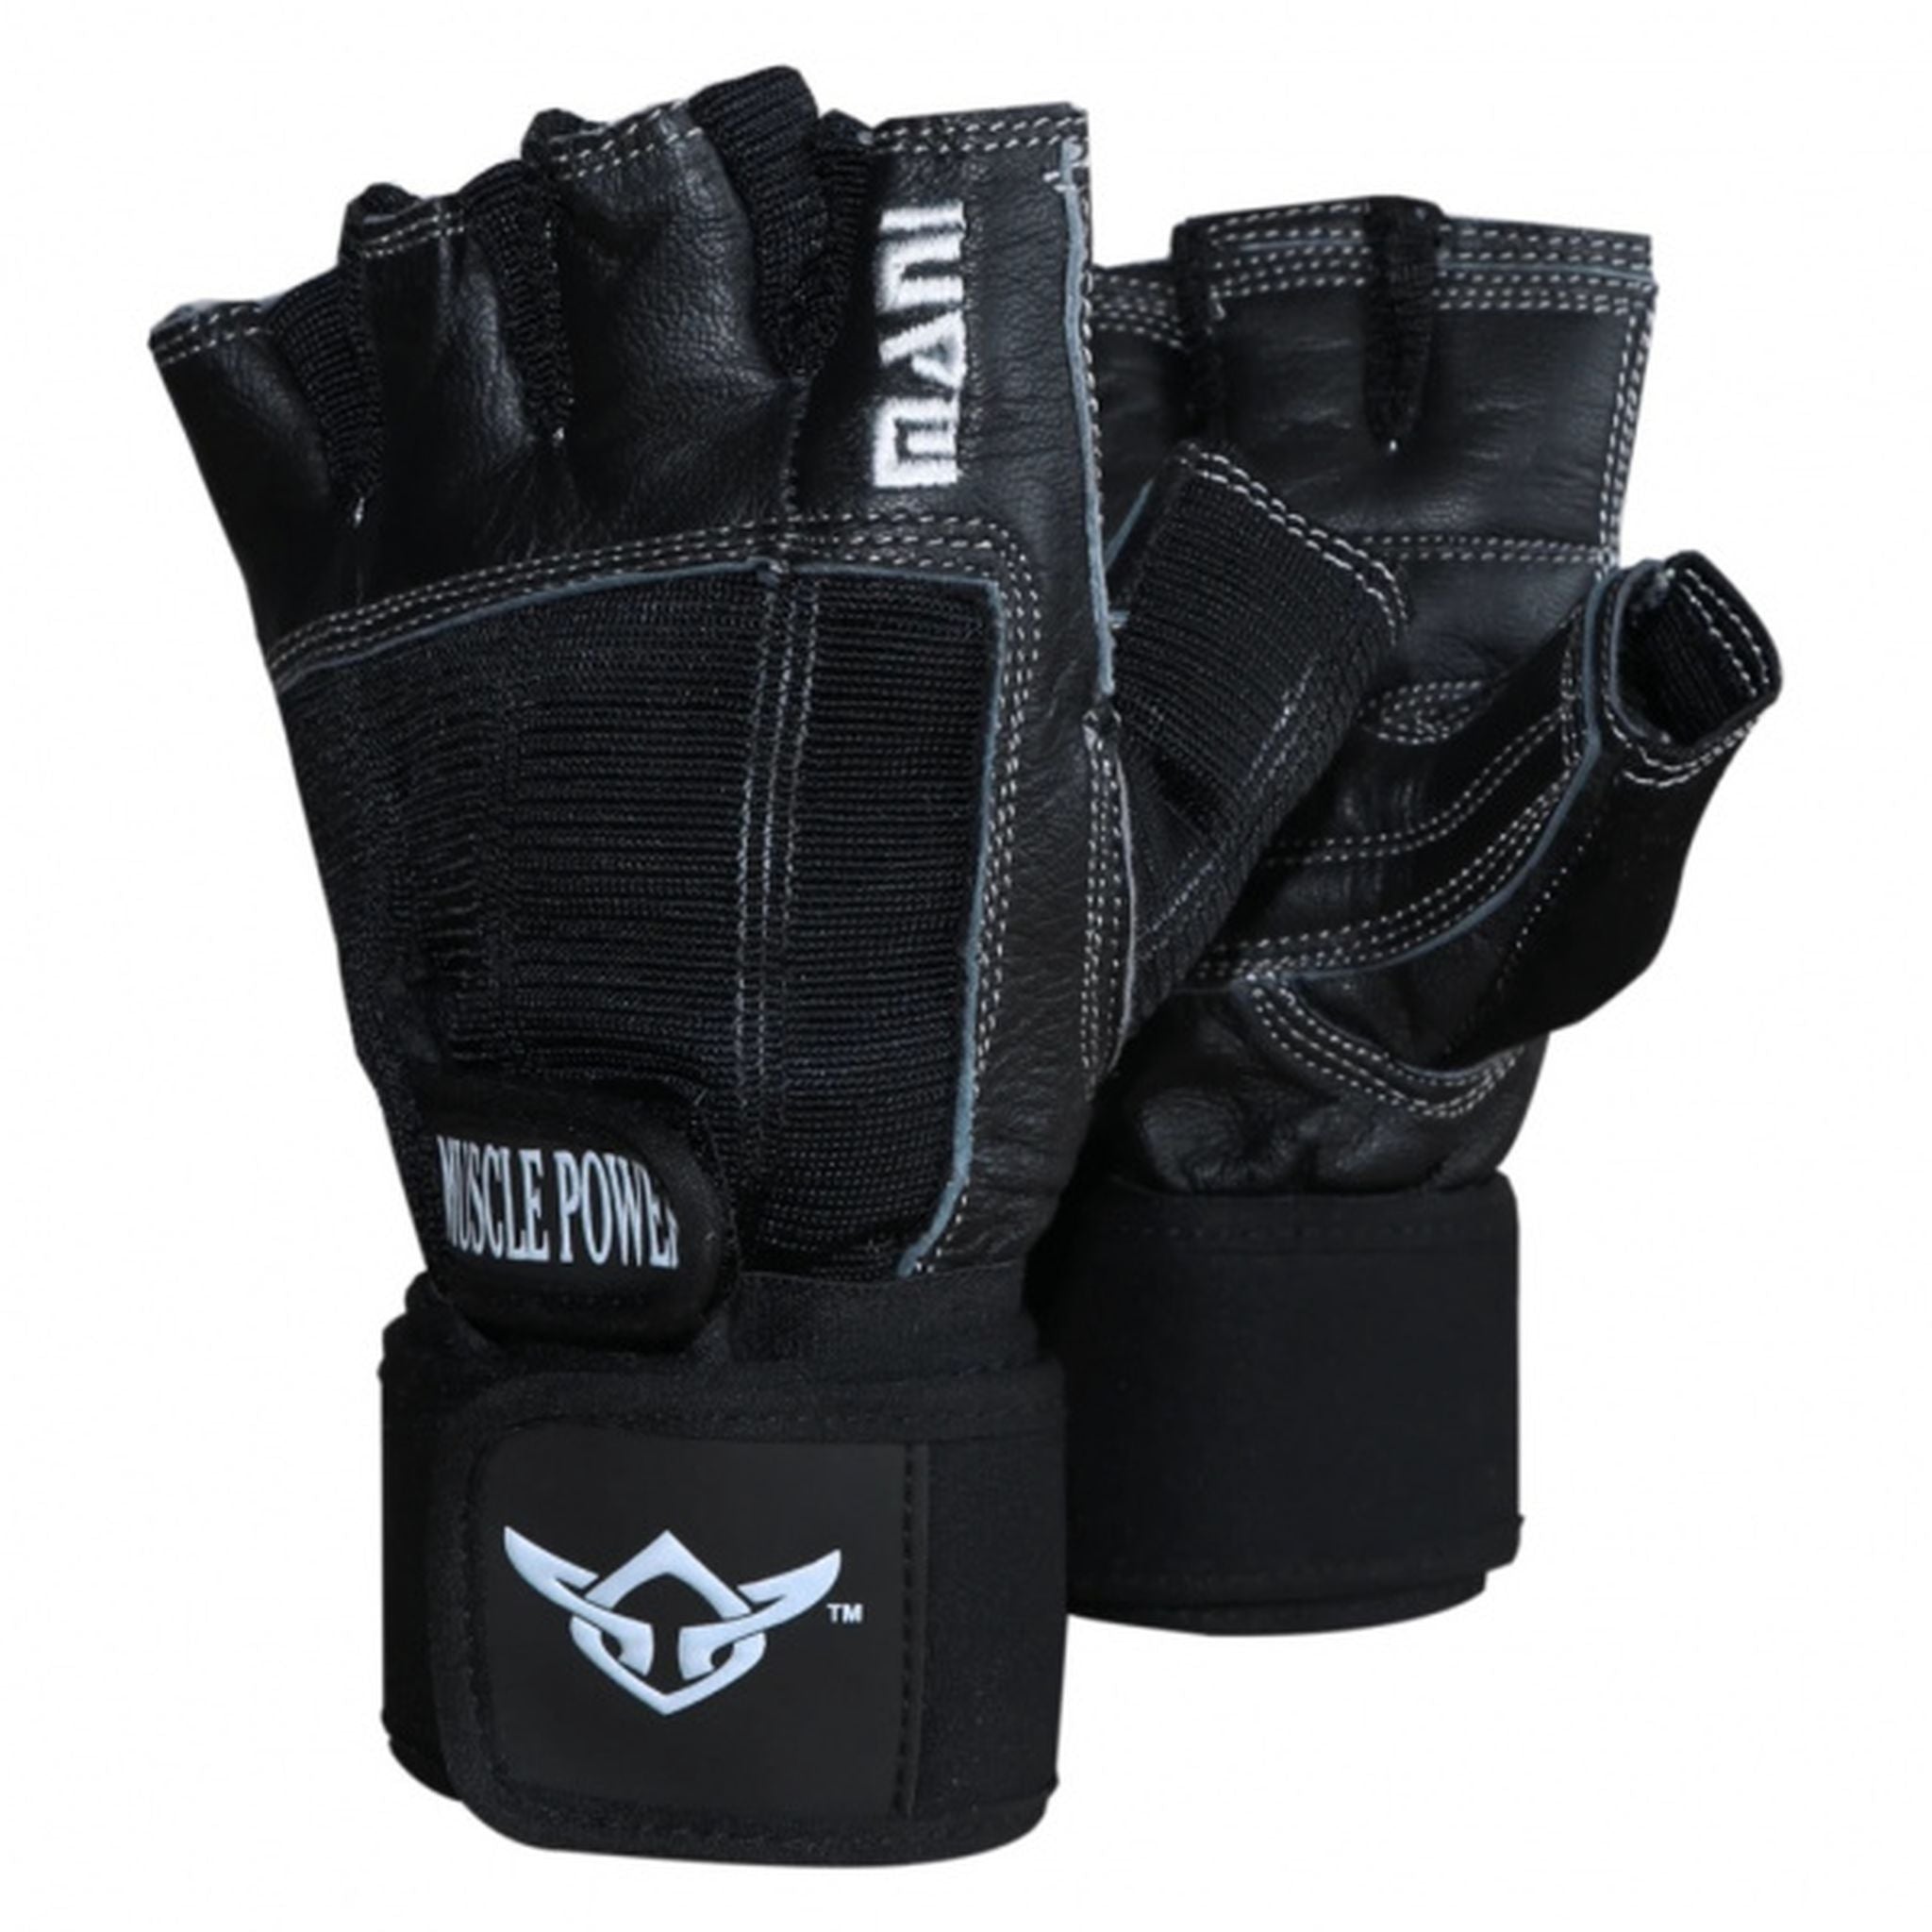 MANI Muscle Power Weight Training Gloves